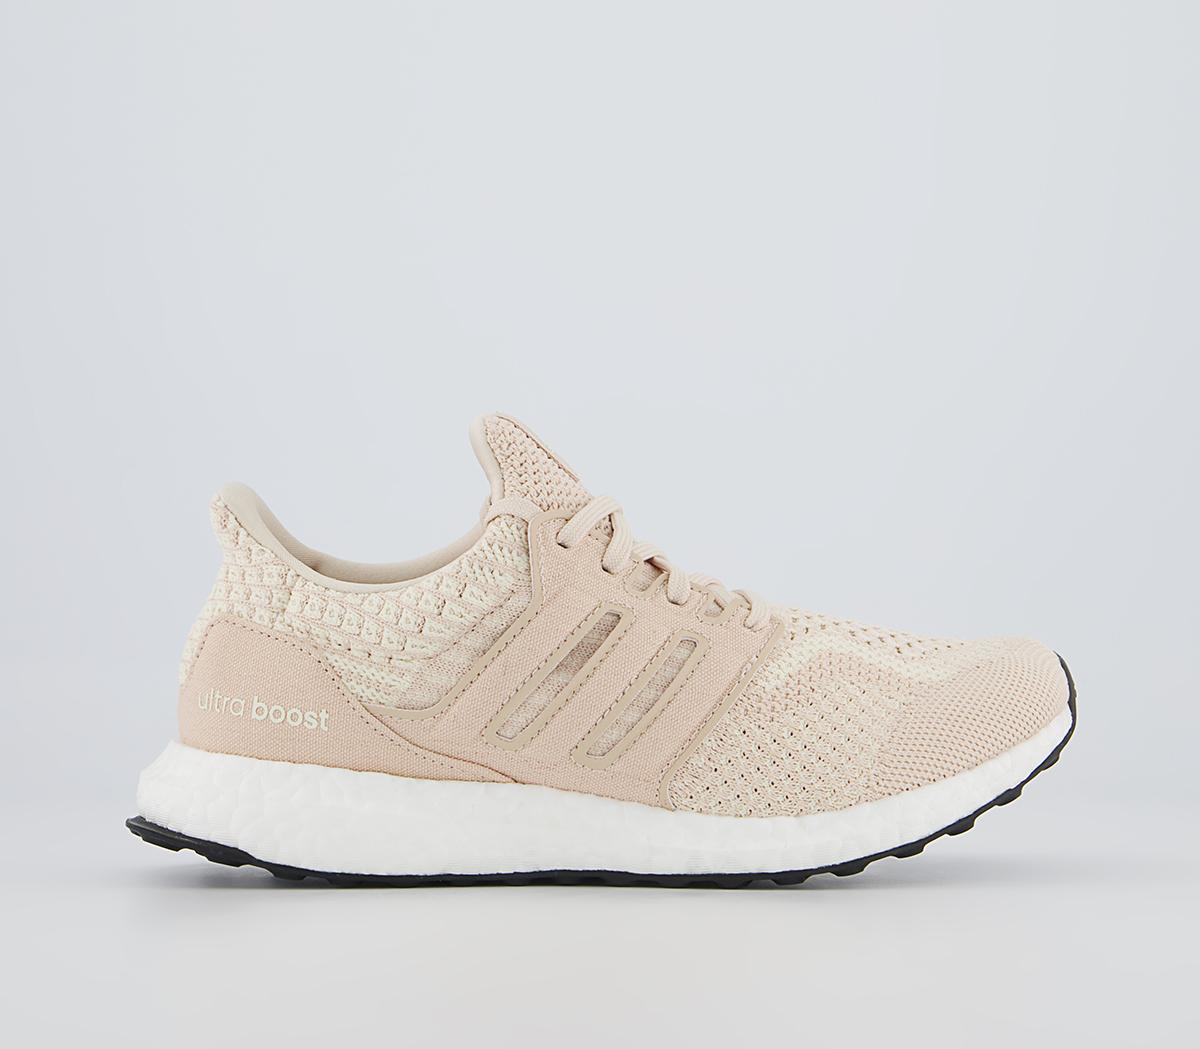 adidasUltraboost 5.0 TrainersHalo Ivory White